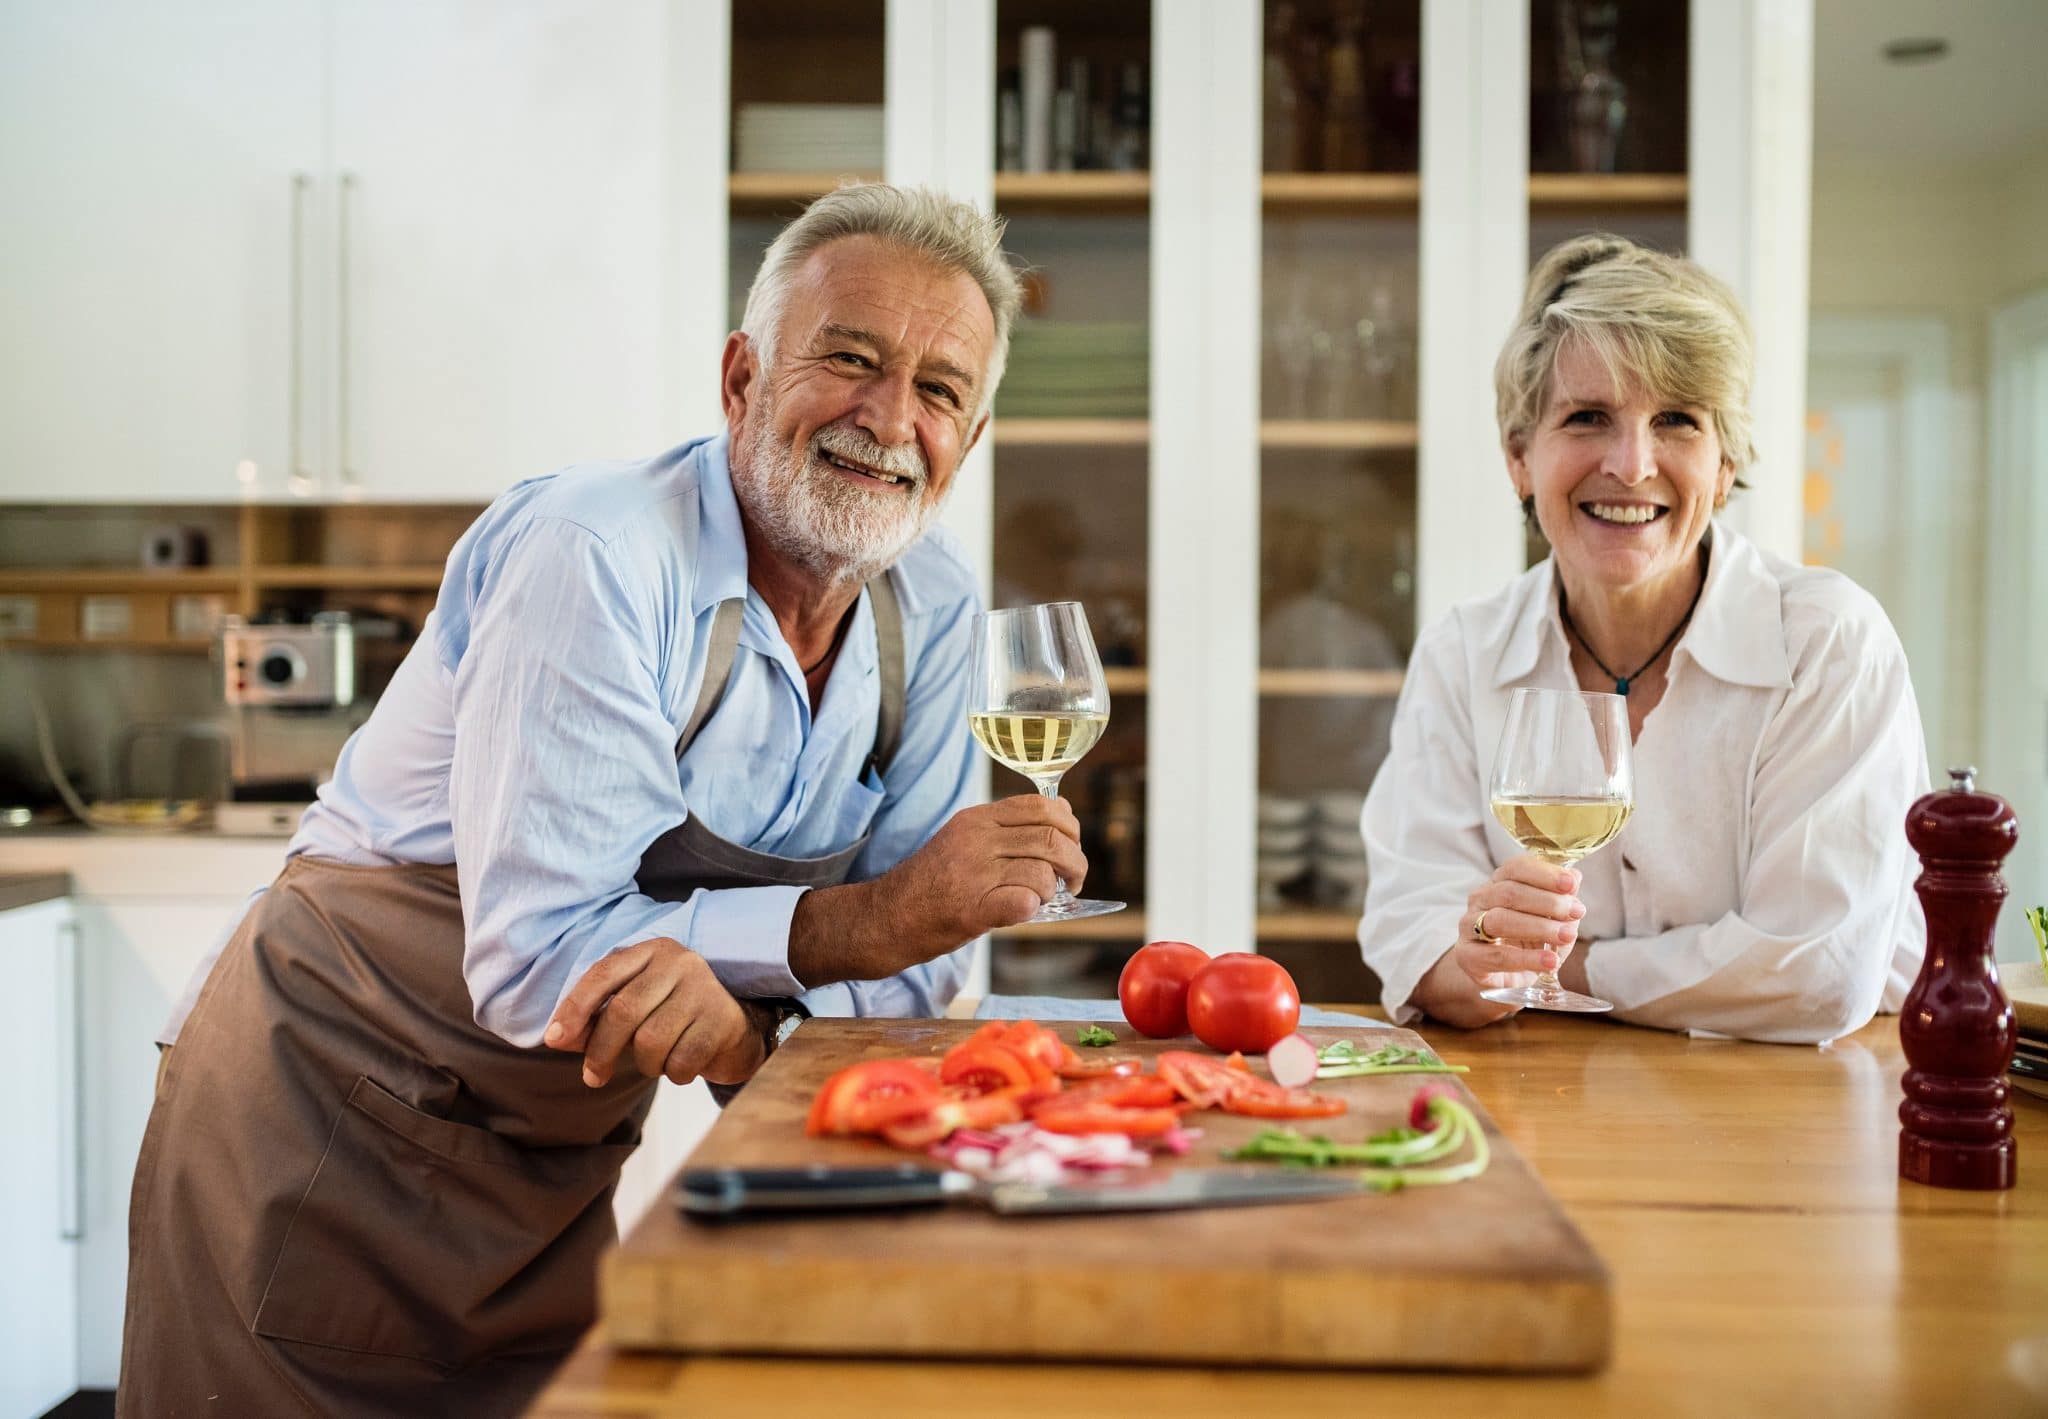 Older couple with wine glasses in hand in a kitchen